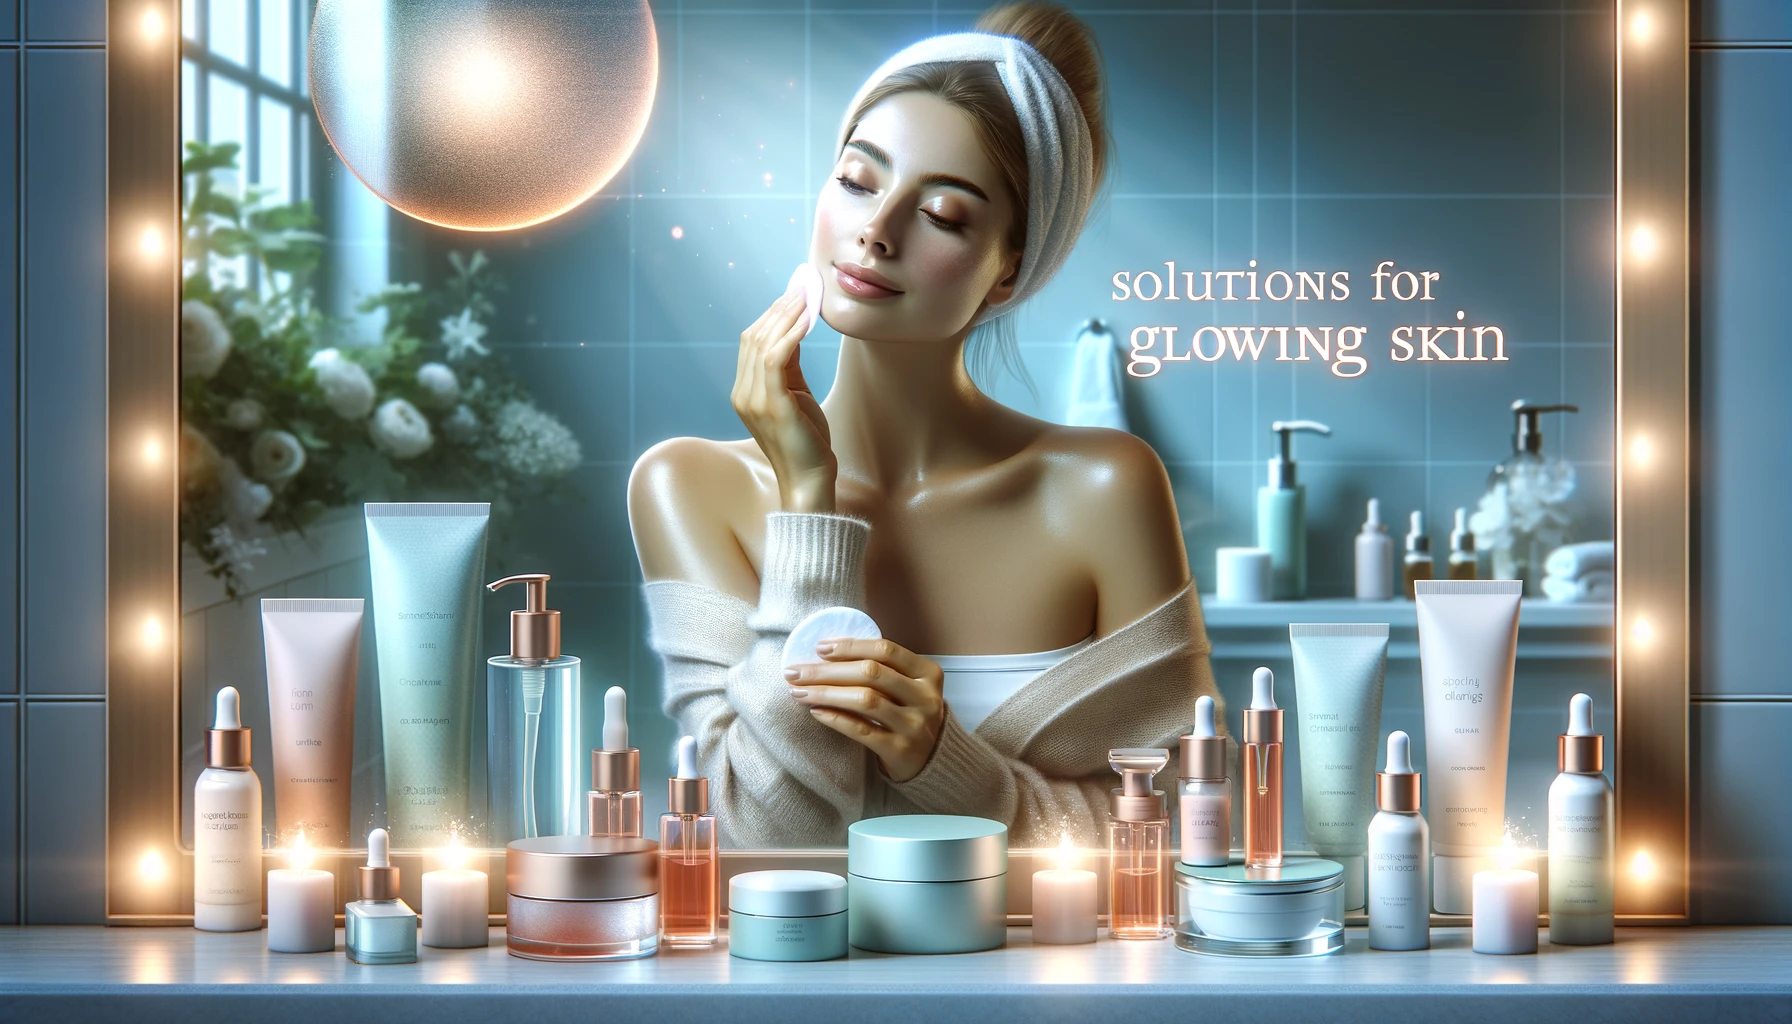 SOLUTIONS FOR GLOWING SKIN